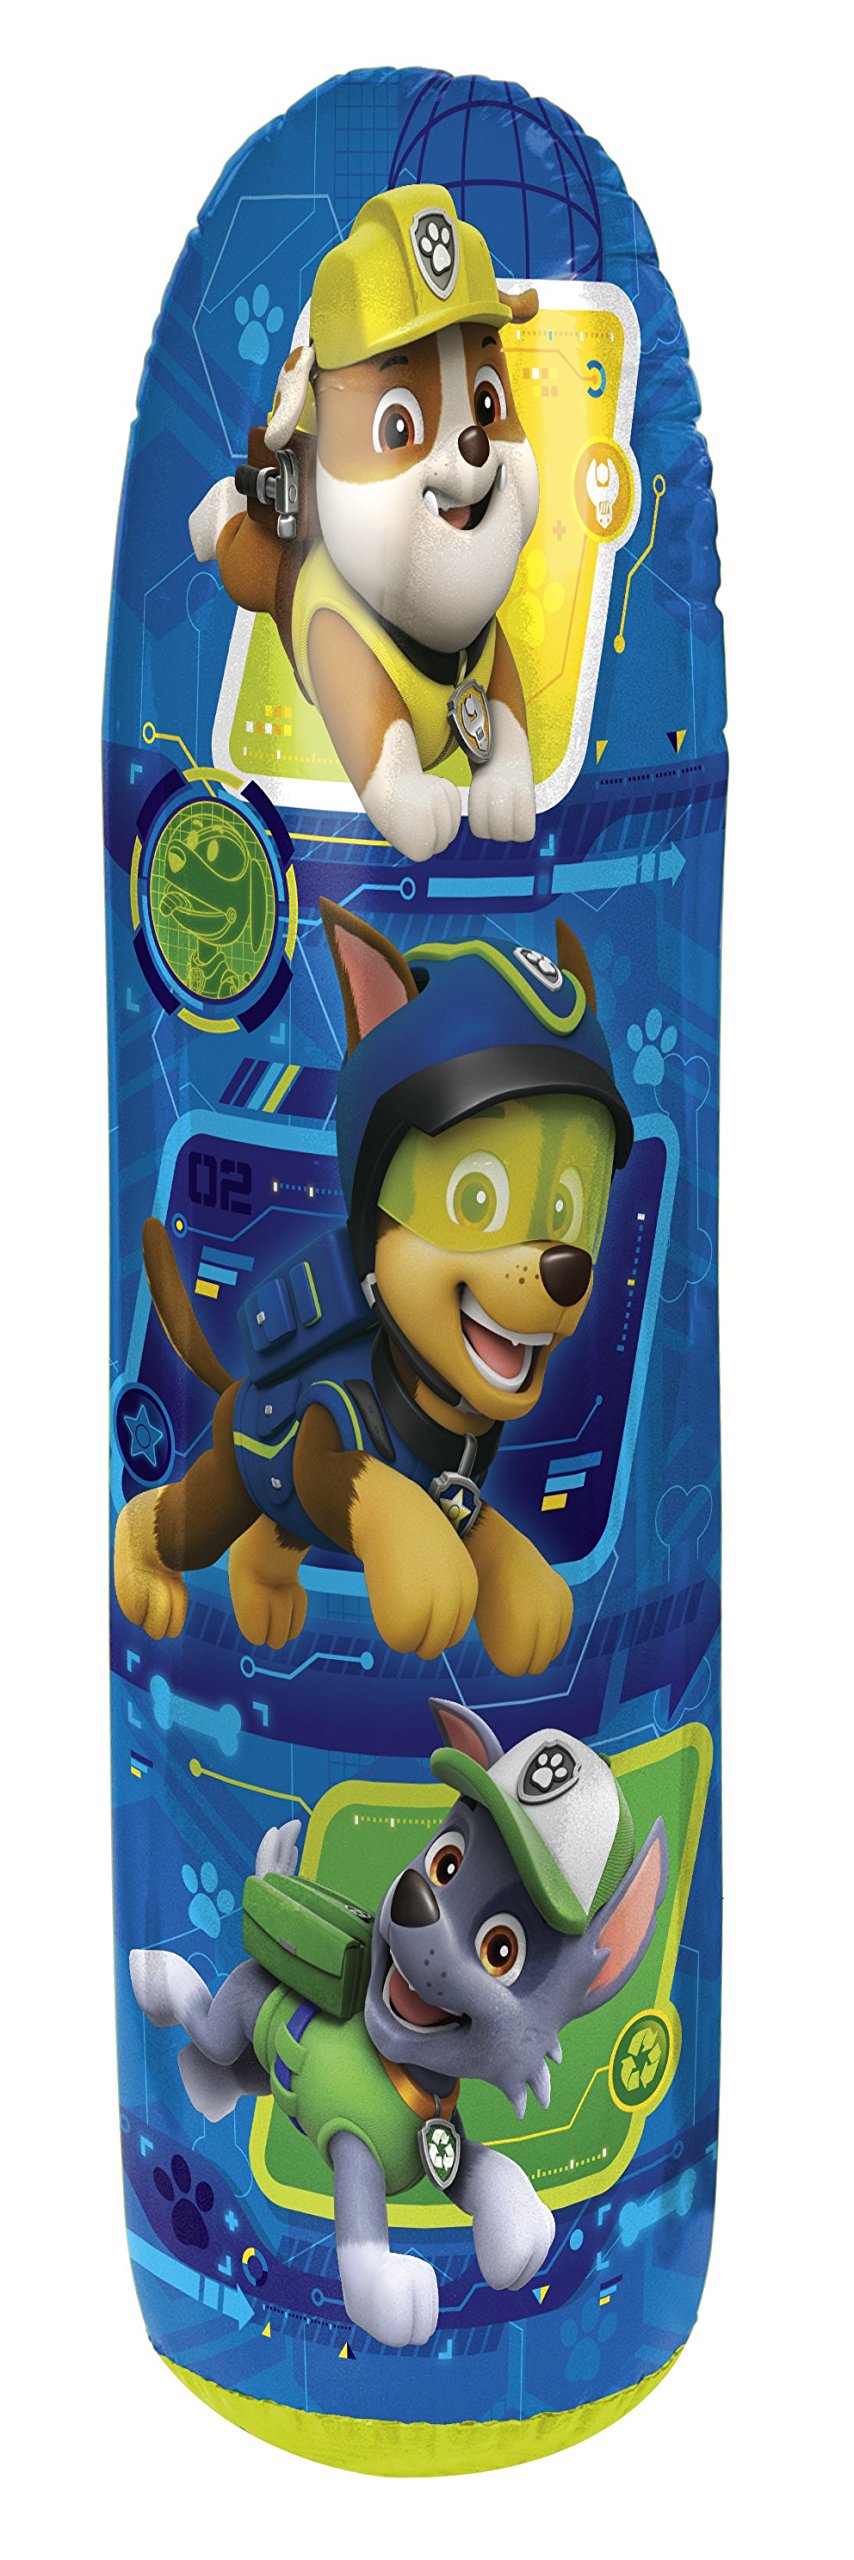 Hedstrom Paw Patrol Bop Bag Inflatable Punching Bag, 42 Inch $4.96 Amazon